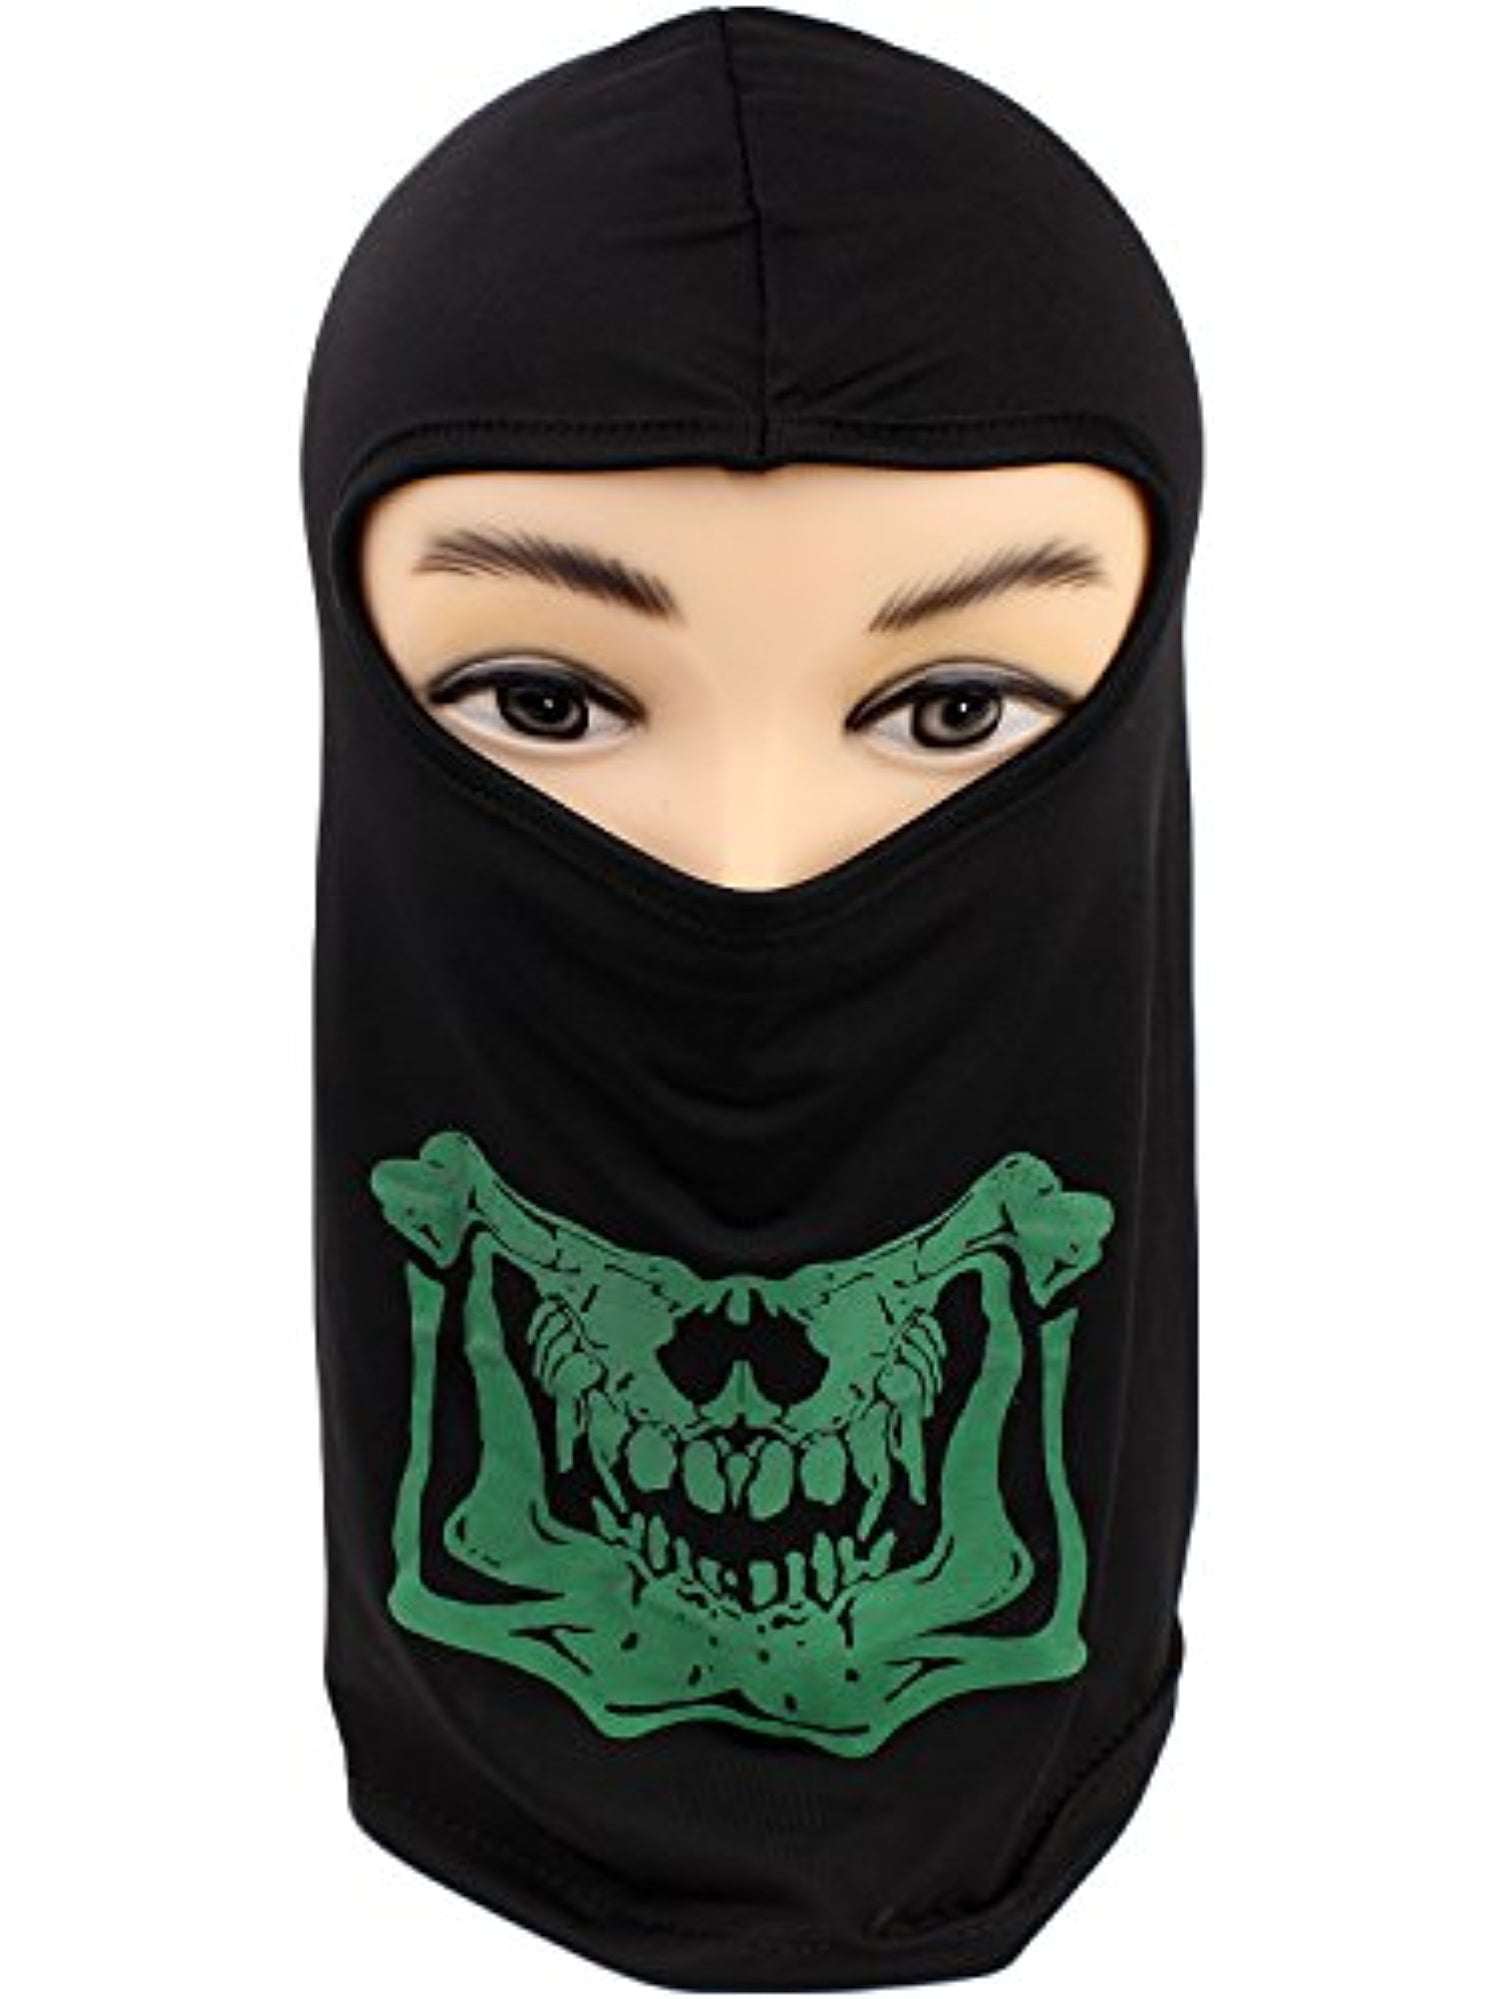 Black Motor Balaclava Multi functional For Protection Against Colds And Bugs